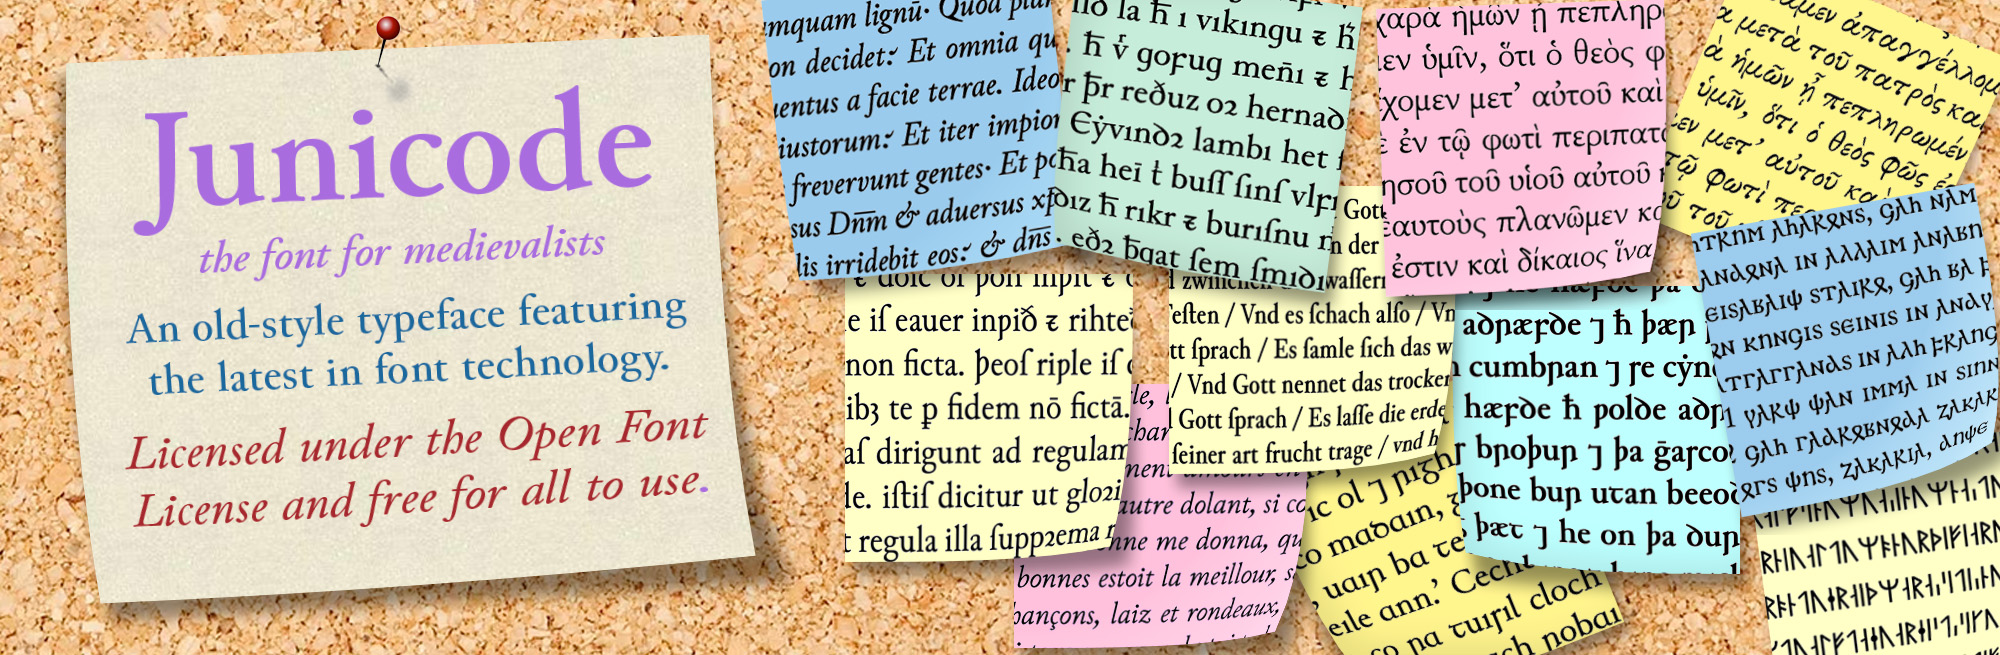 Junicode: the font for medievalists